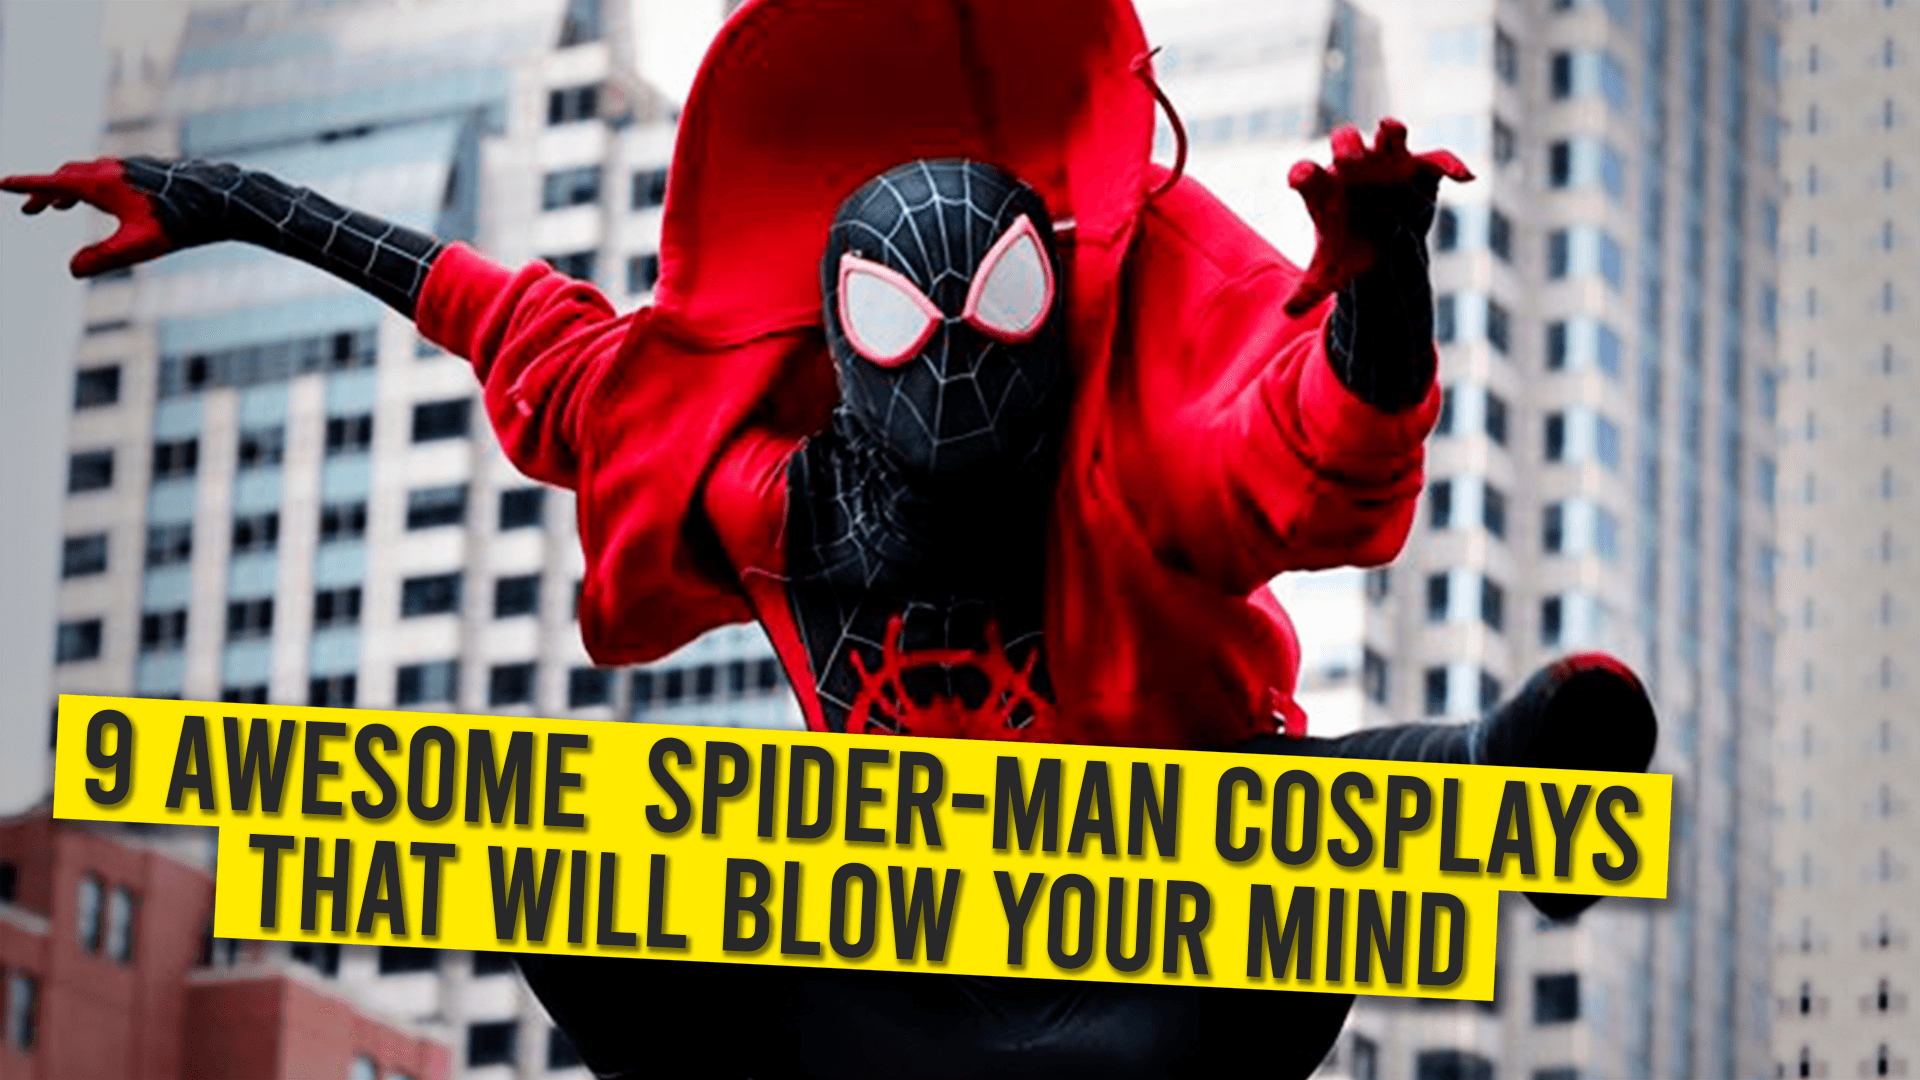 9 Awesome Spider-Man Cosplays That Will Blow Your Mind.